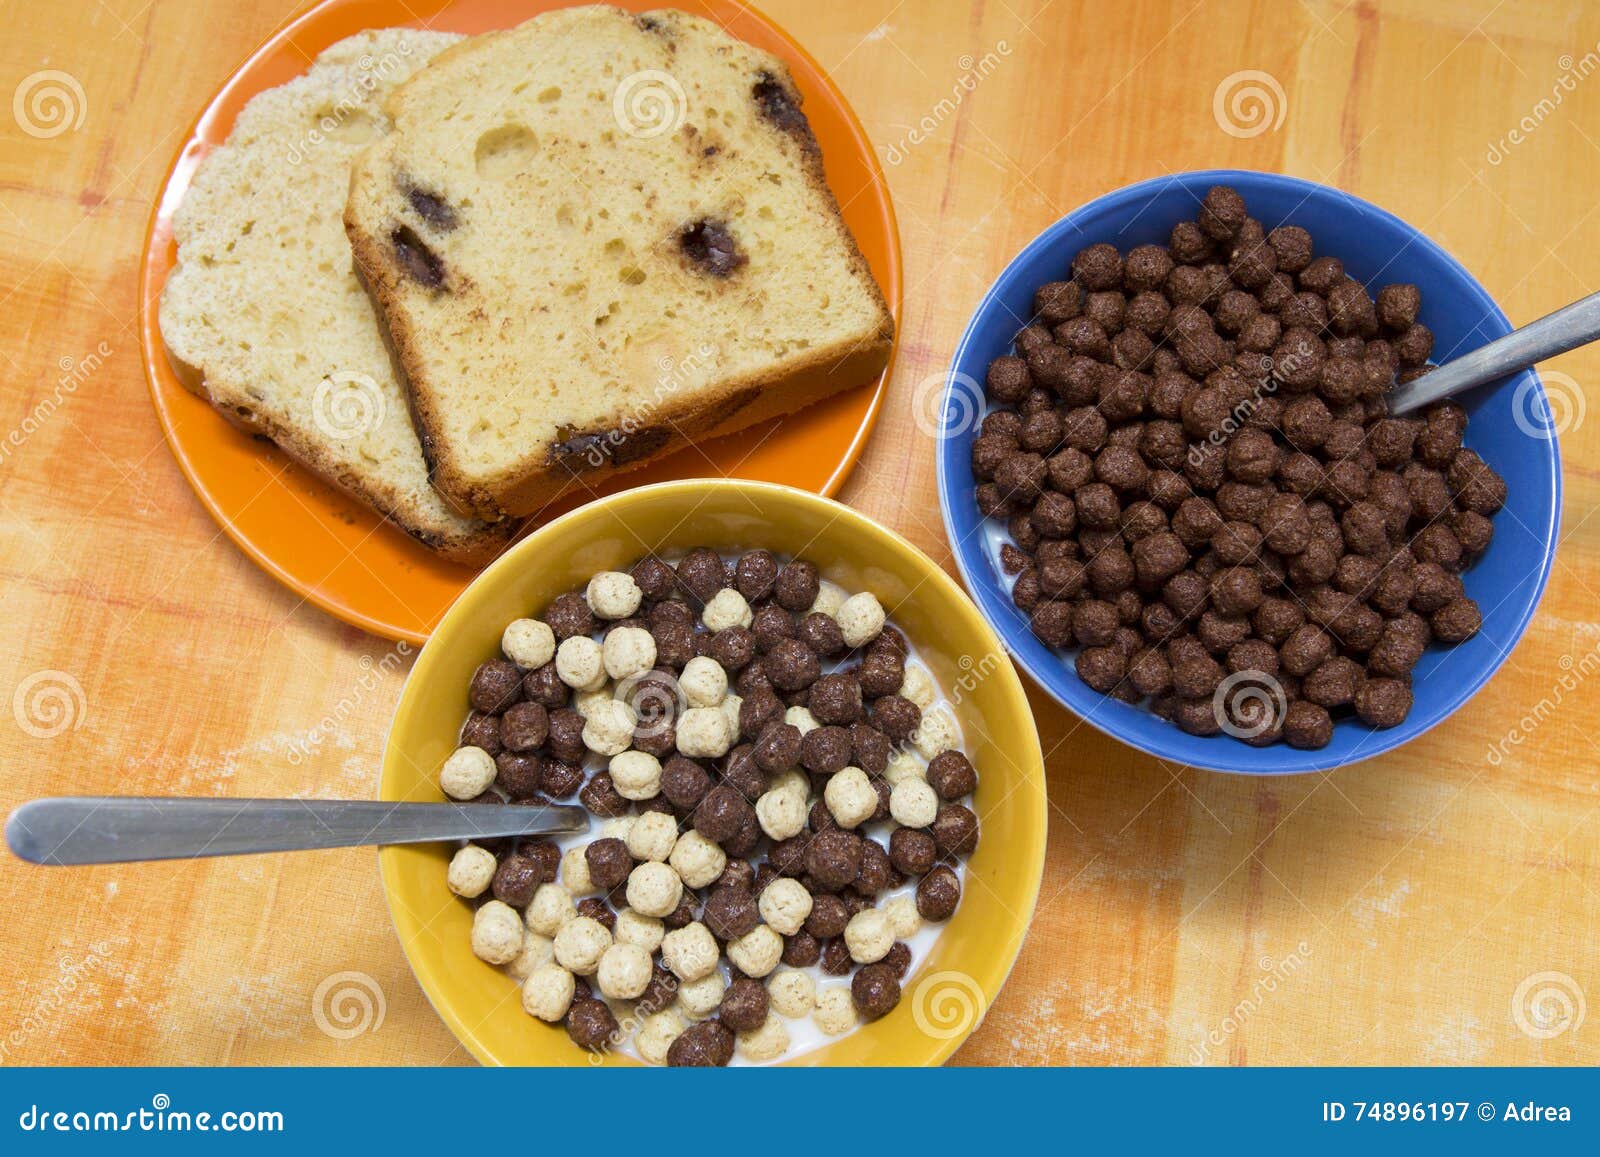 bole of cereals and a plate with sweet bread